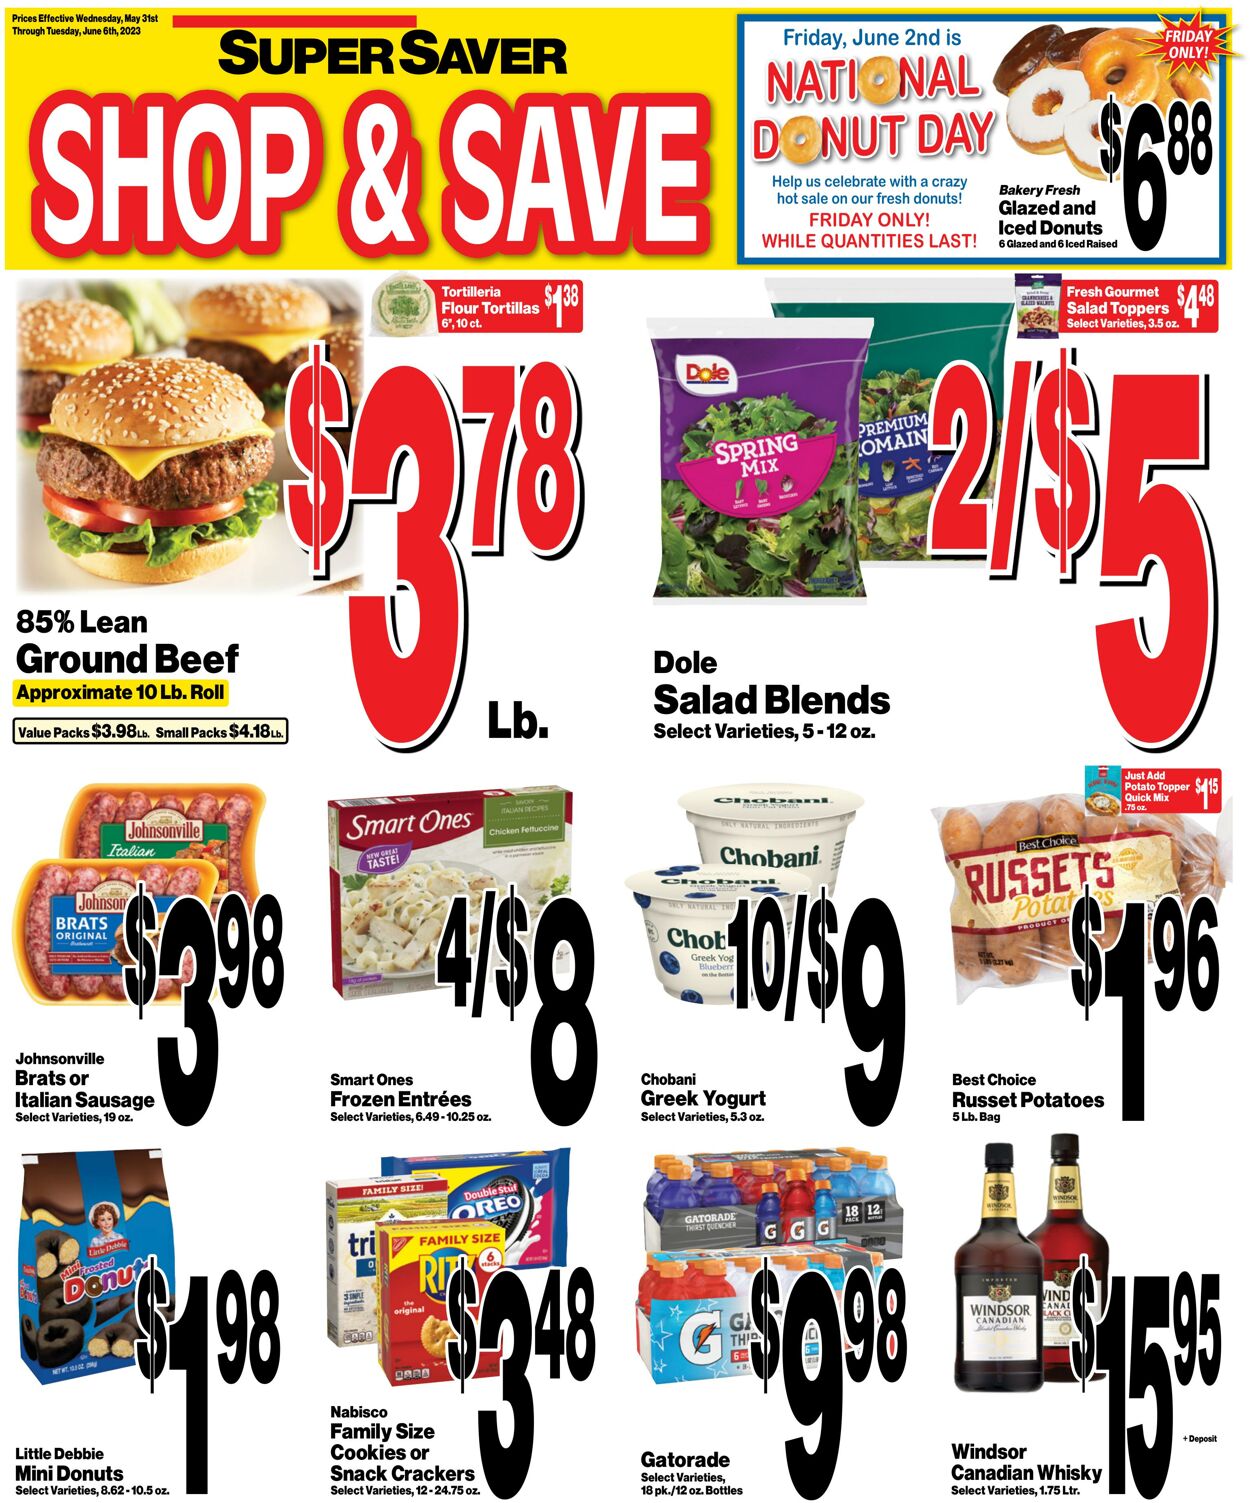 Super Saver Promotional weekly ads